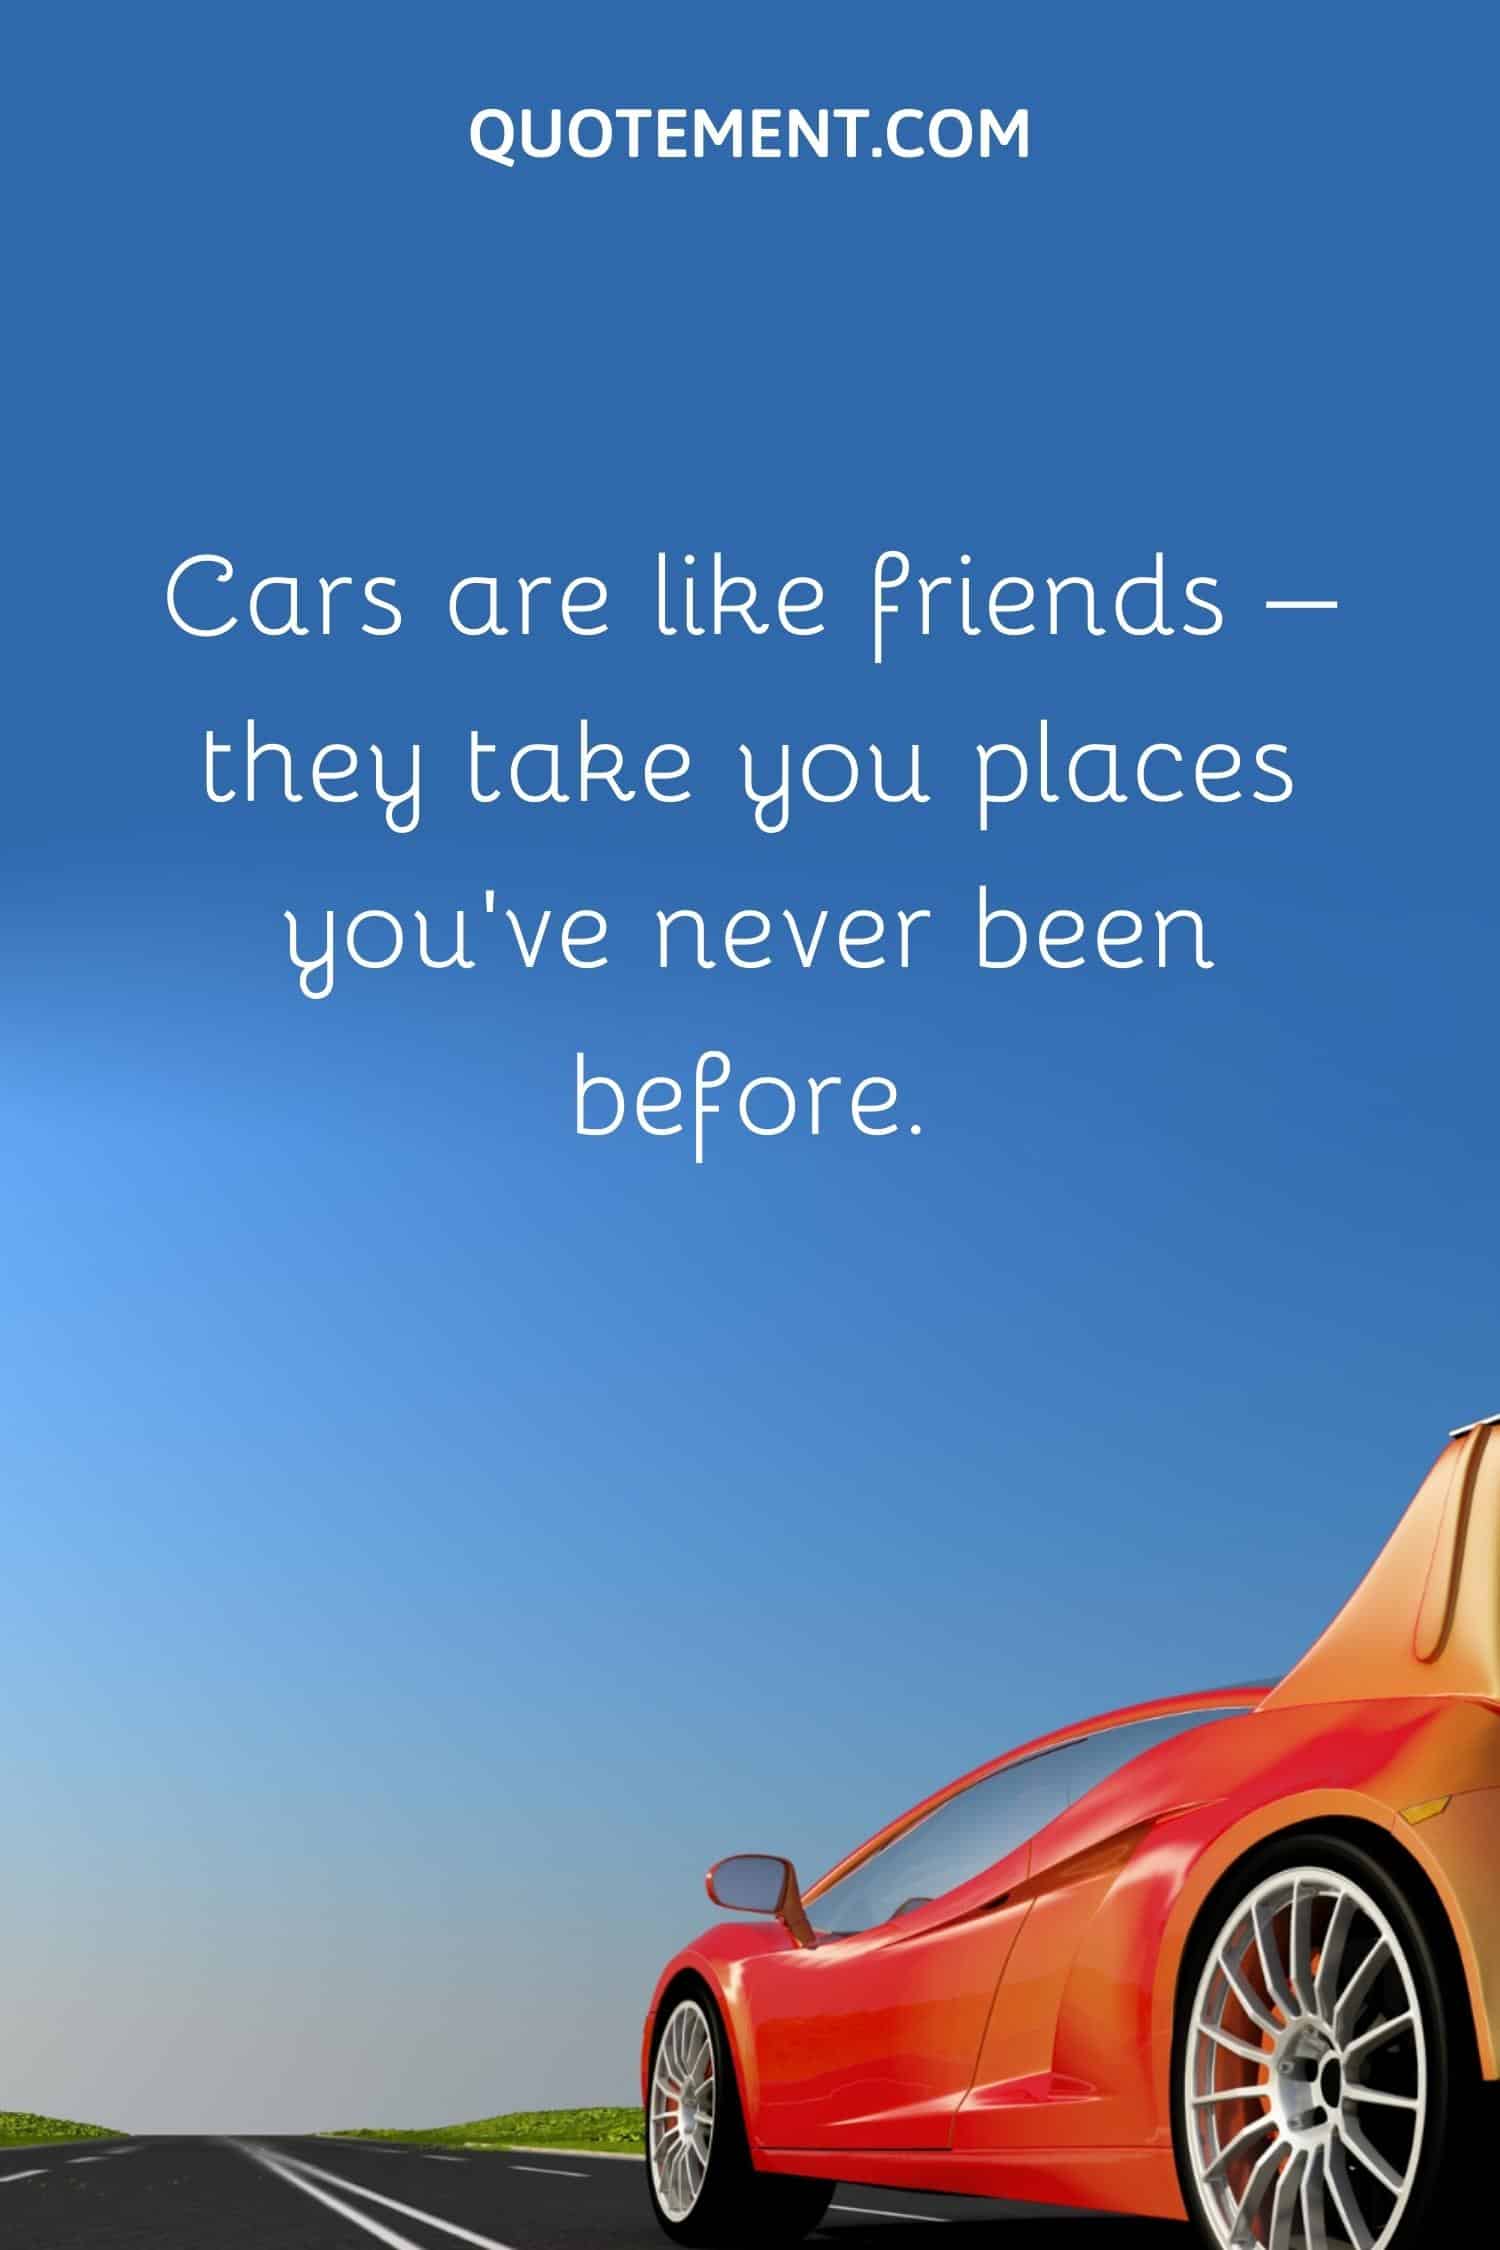 Cars are like friends